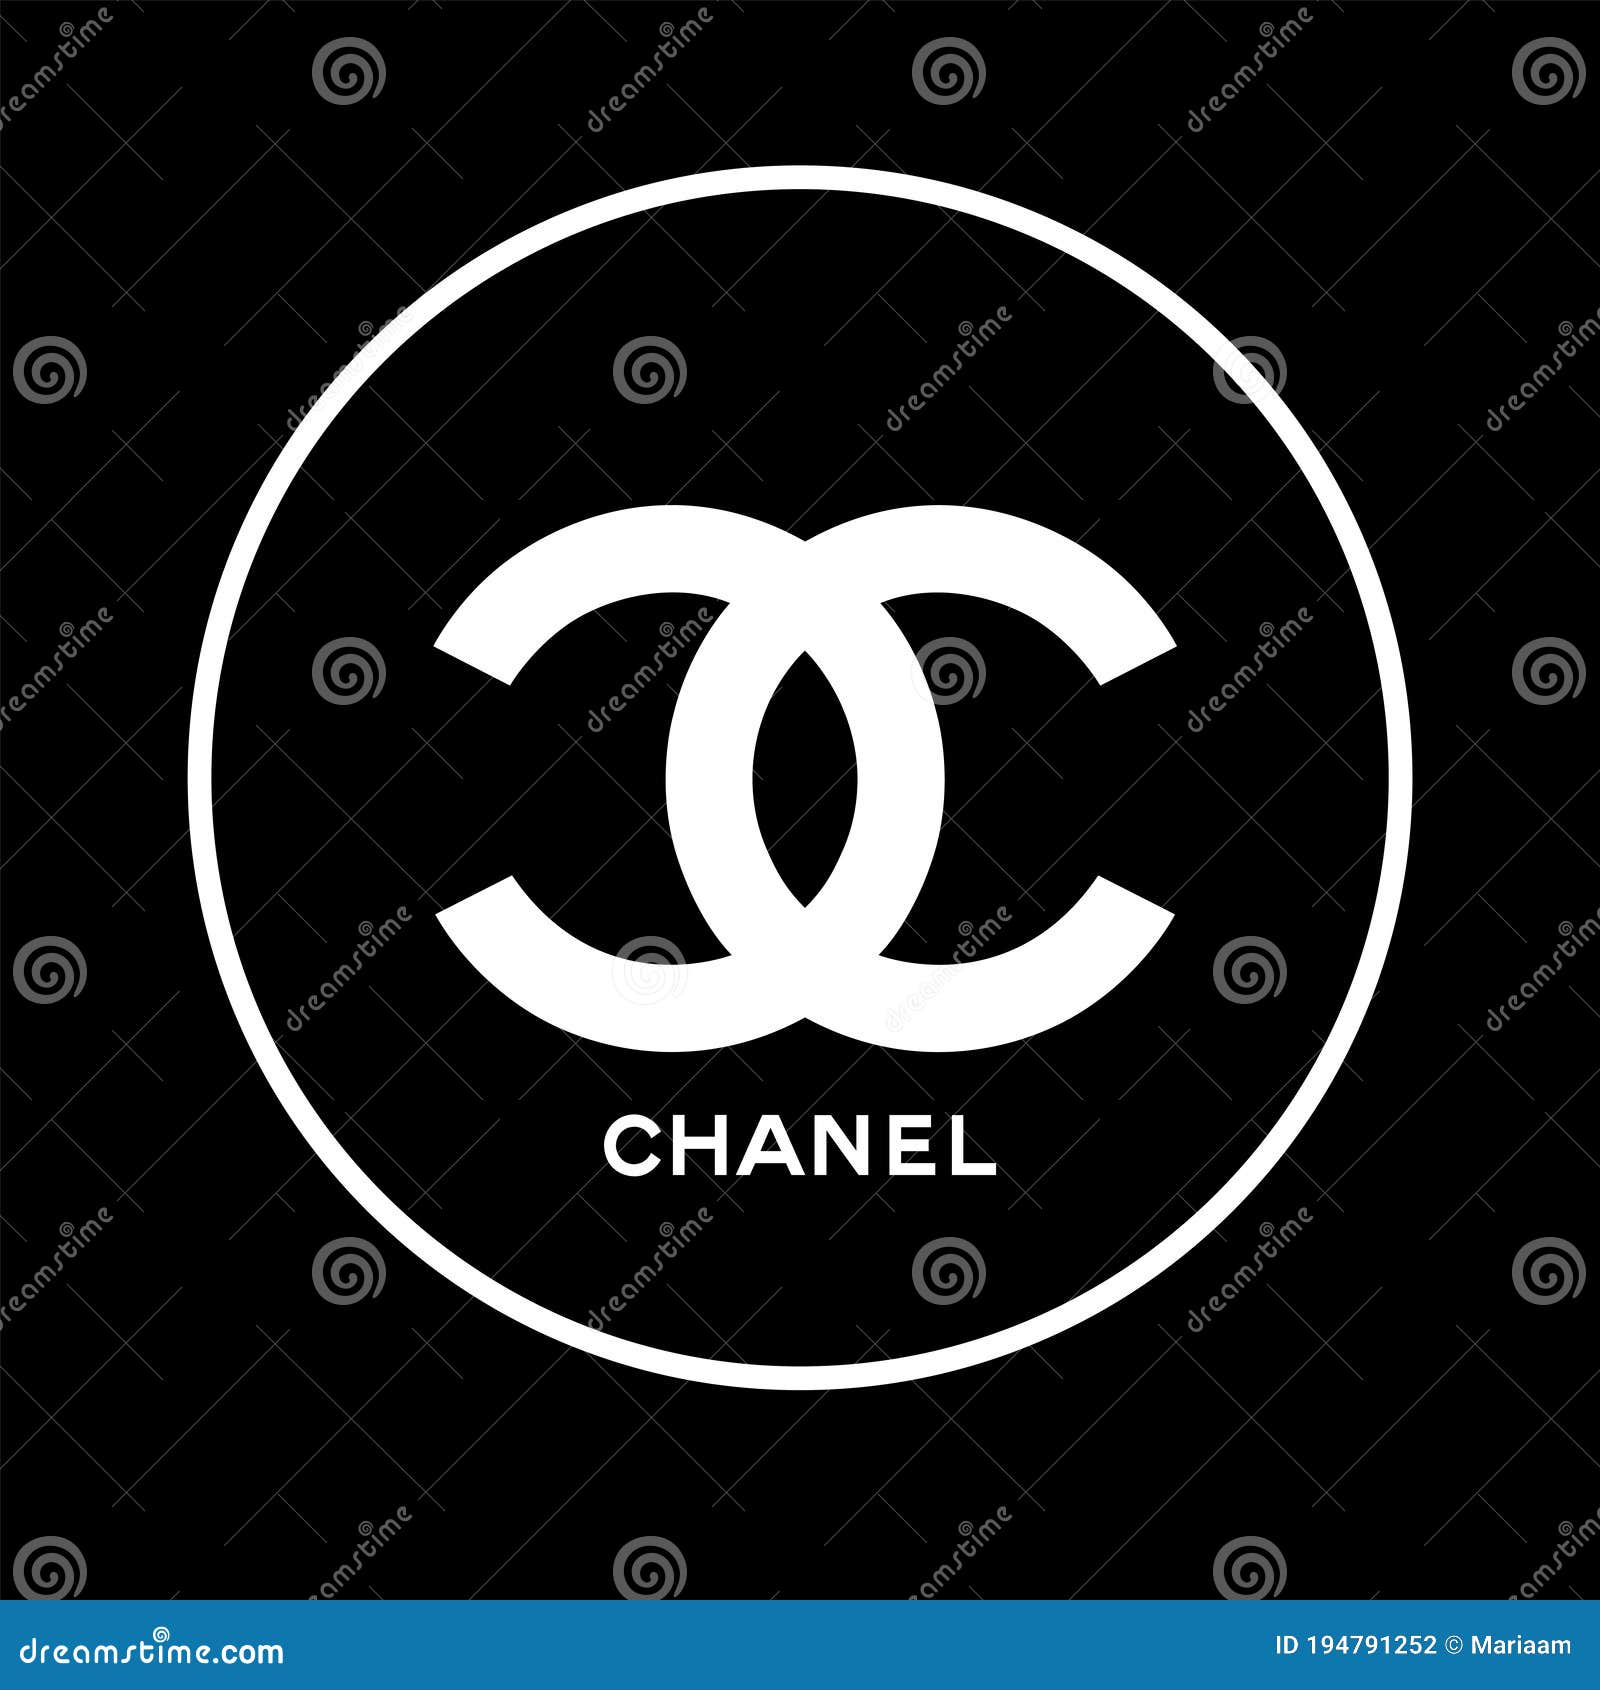 Coco Chanel. The Popular Chanel Logo In White Over Black Background.  Editorial Photography - Illustration Of Jewelry, Coco: 194791252